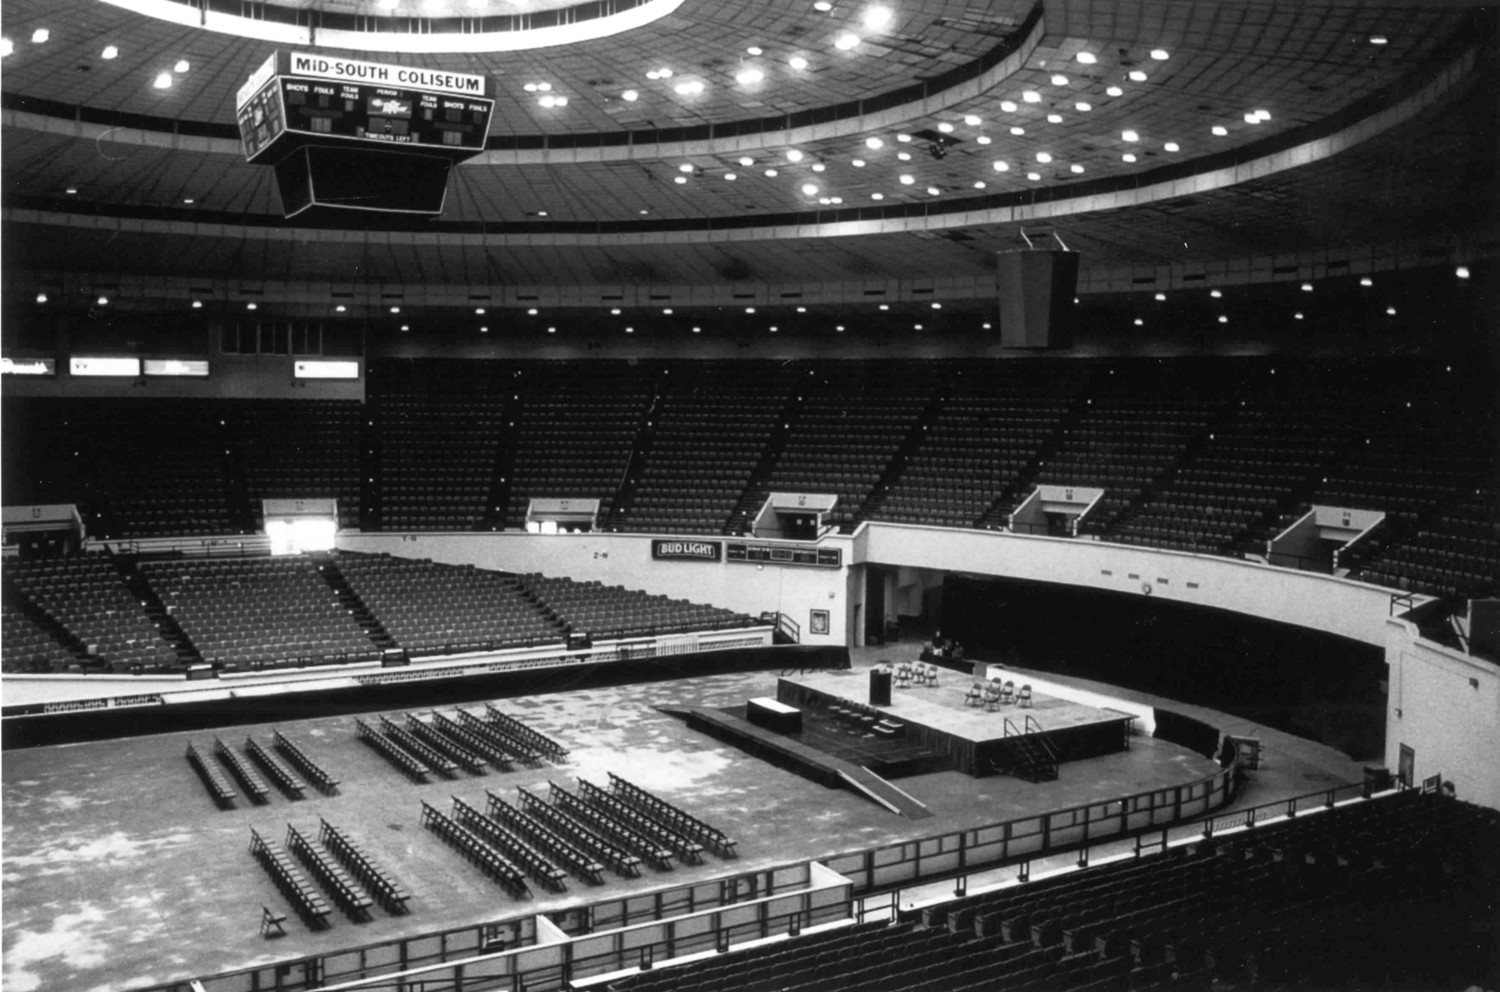 Mid-South Coliseum, Memphis Tennessee Arena, looking northerly (2000)